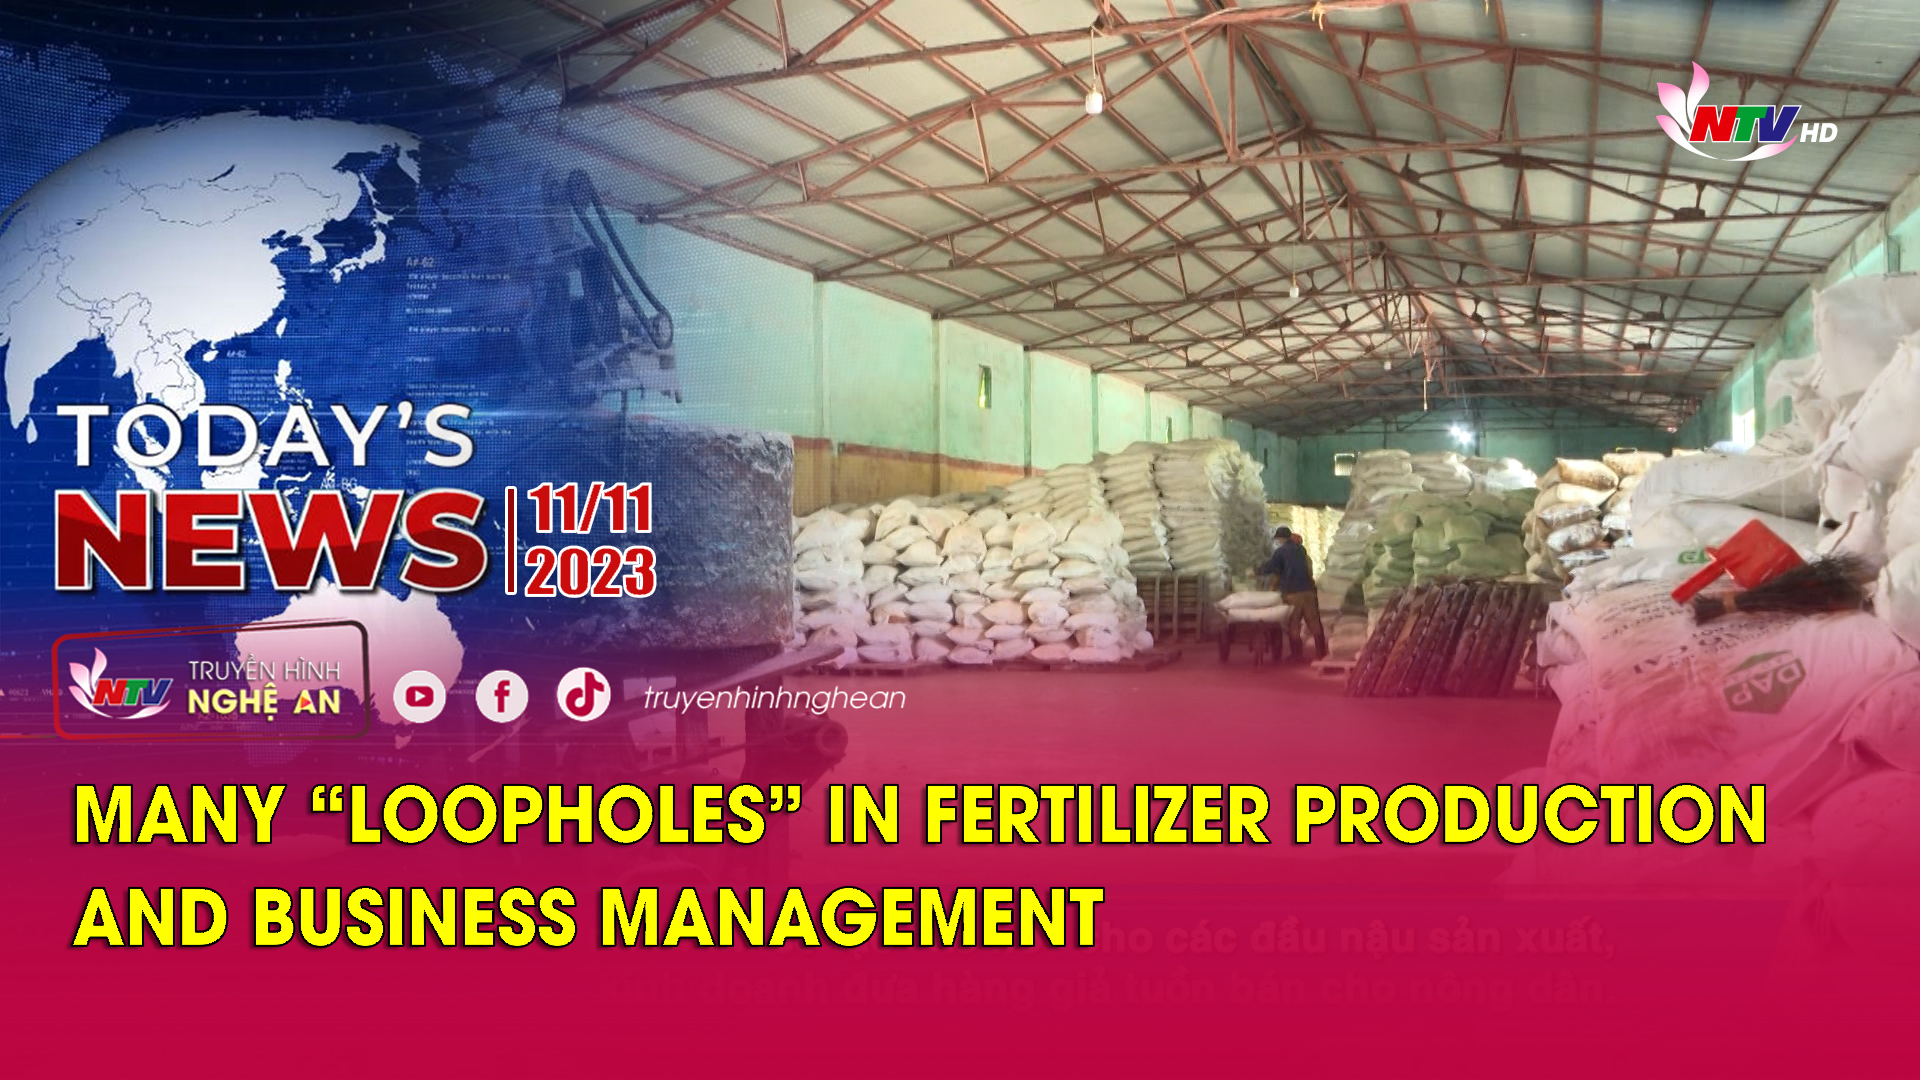 Today's News - 11/11/2023: Many "loopholes" in fertilizer production and business management